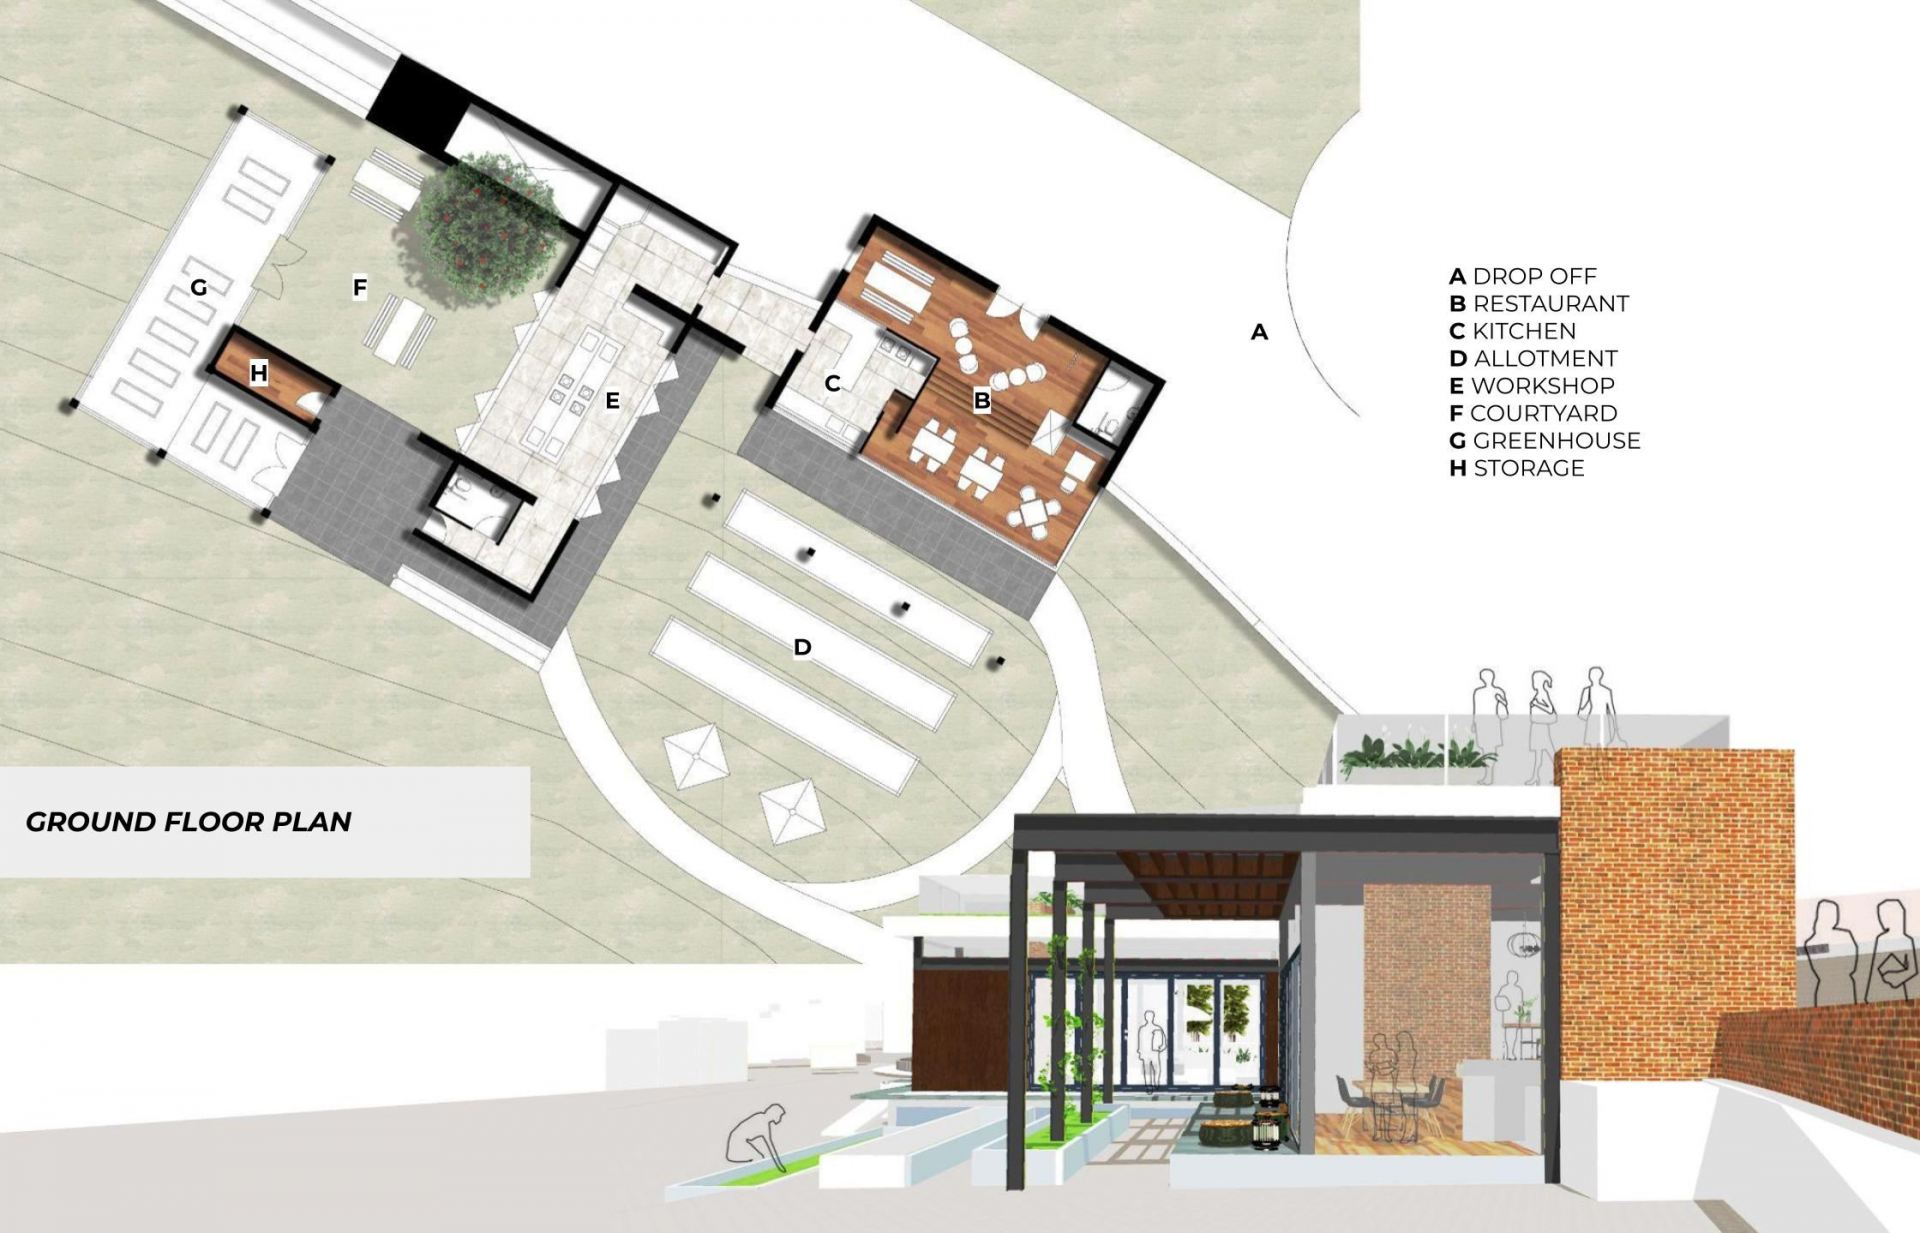 Ground floor plan and visualization